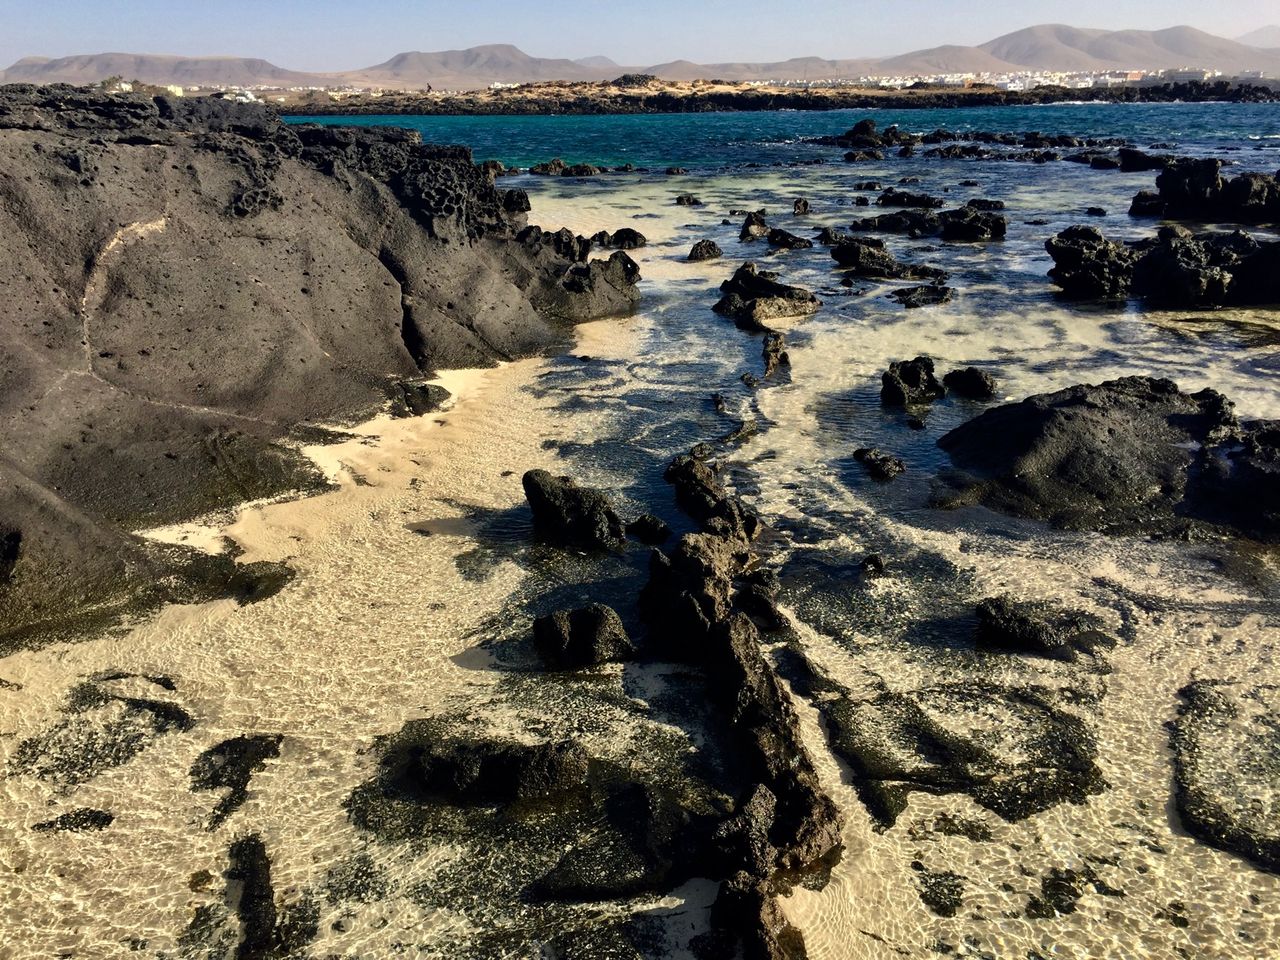 Black lava rocks in shallow water covered by sand.